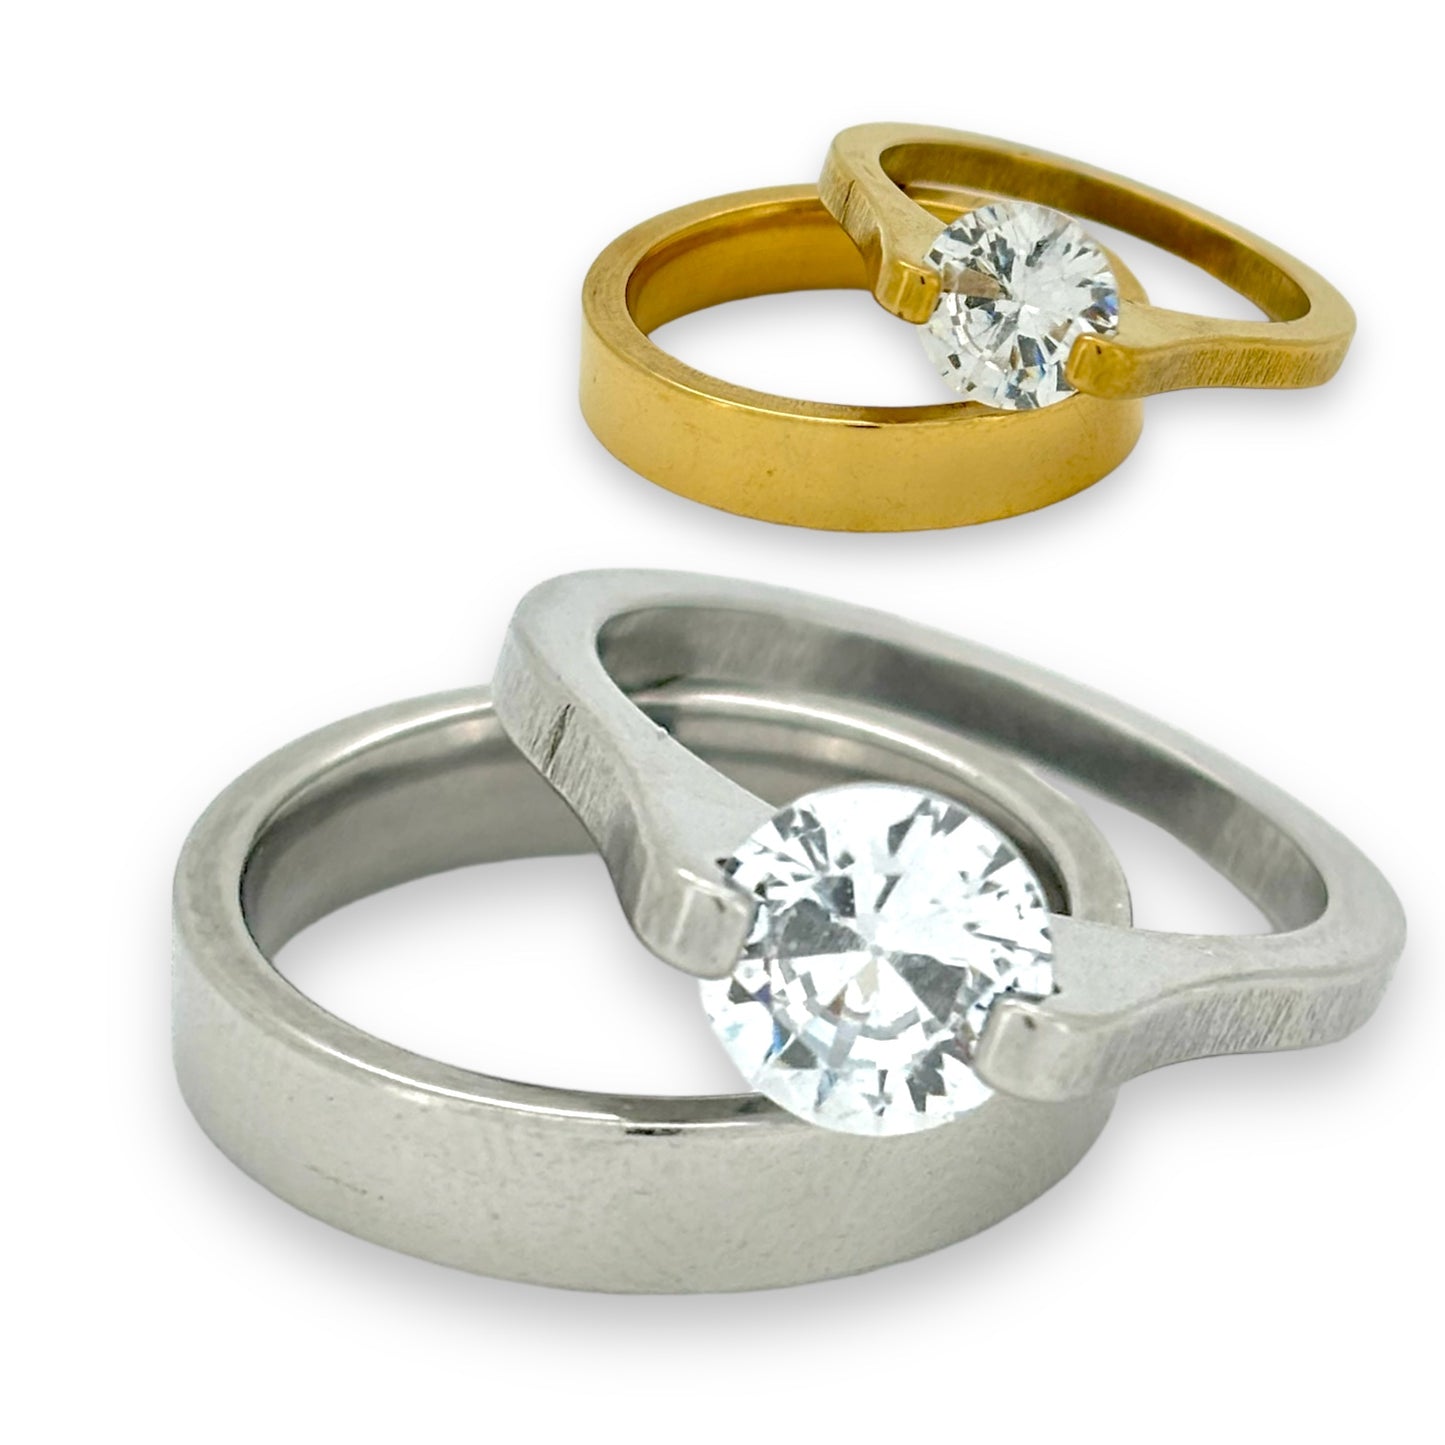 Engagement ring and wedding band ring set in Silver or Gold Stainless steel water resistant